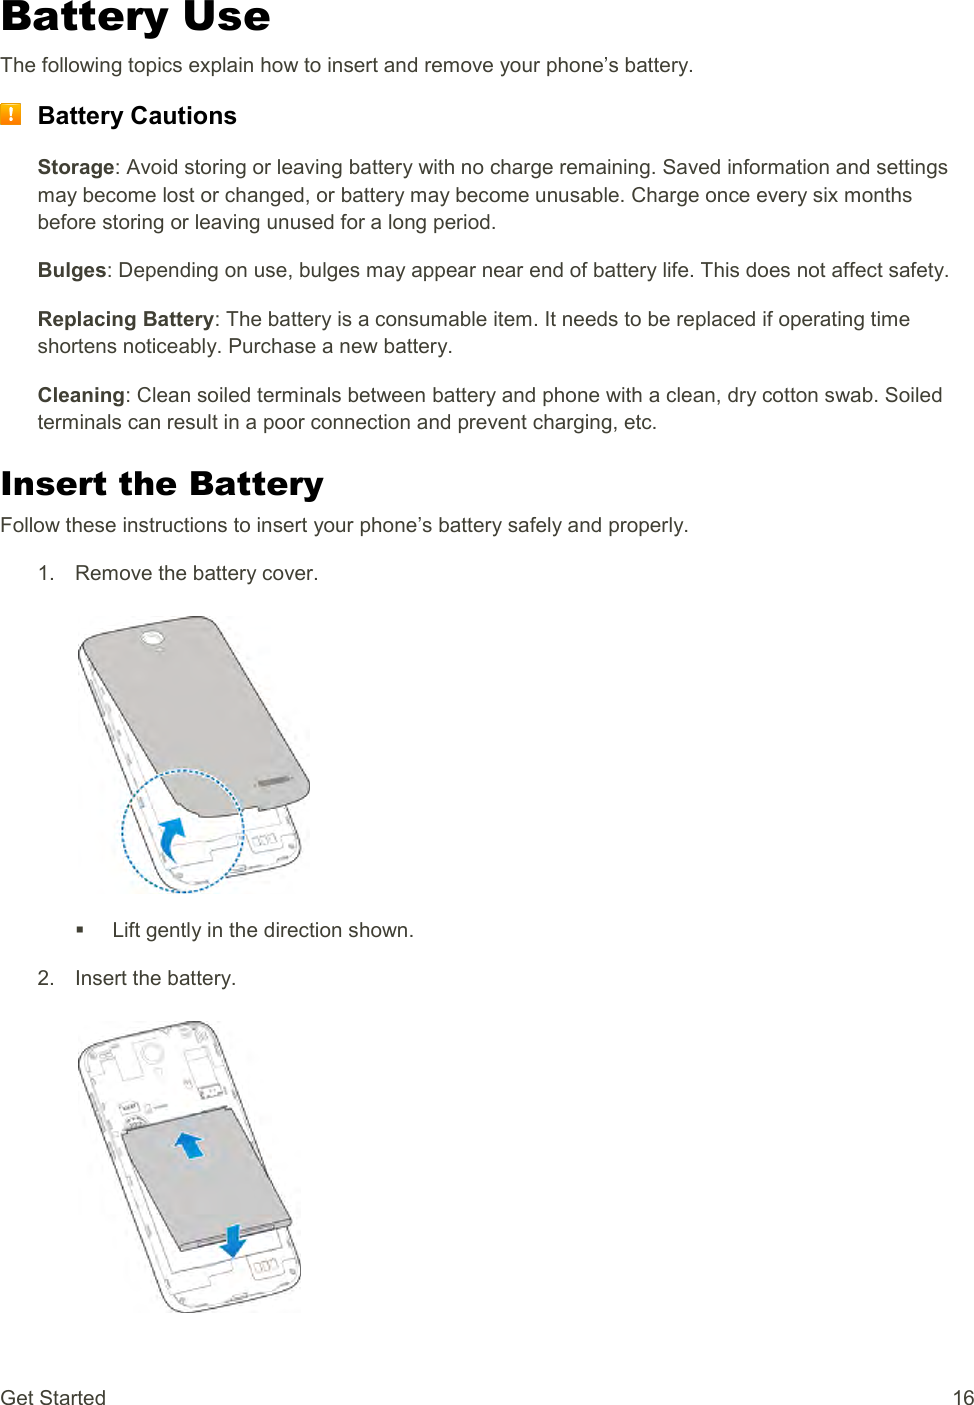 Get Started  16 Battery Use The following topics explain how to insert and remove your phone’s battery.  Battery Cautions Storage: Avoid storing or leaving battery with no charge remaining. Saved information and settings may become lost or changed, or battery may become unusable. Charge once every six months before storing or leaving unused for a long period. Bulges: Depending on use, bulges may appear near end of battery life. This does not affect safety. Replacing Battery: The battery is a consumable item. It needs to be replaced if operating time shortens noticeably. Purchase a new battery. Cleaning: Clean soiled terminals between battery and phone with a clean, dry cotton swab. Soiled terminals can result in a poor connection and prevent charging, etc. Insert the Battery Follow these instructions to insert your phone’s battery safely and properly. 1.  Remove the battery cover.     Lift gently in the direction shown. 2.  Insert the battery.   